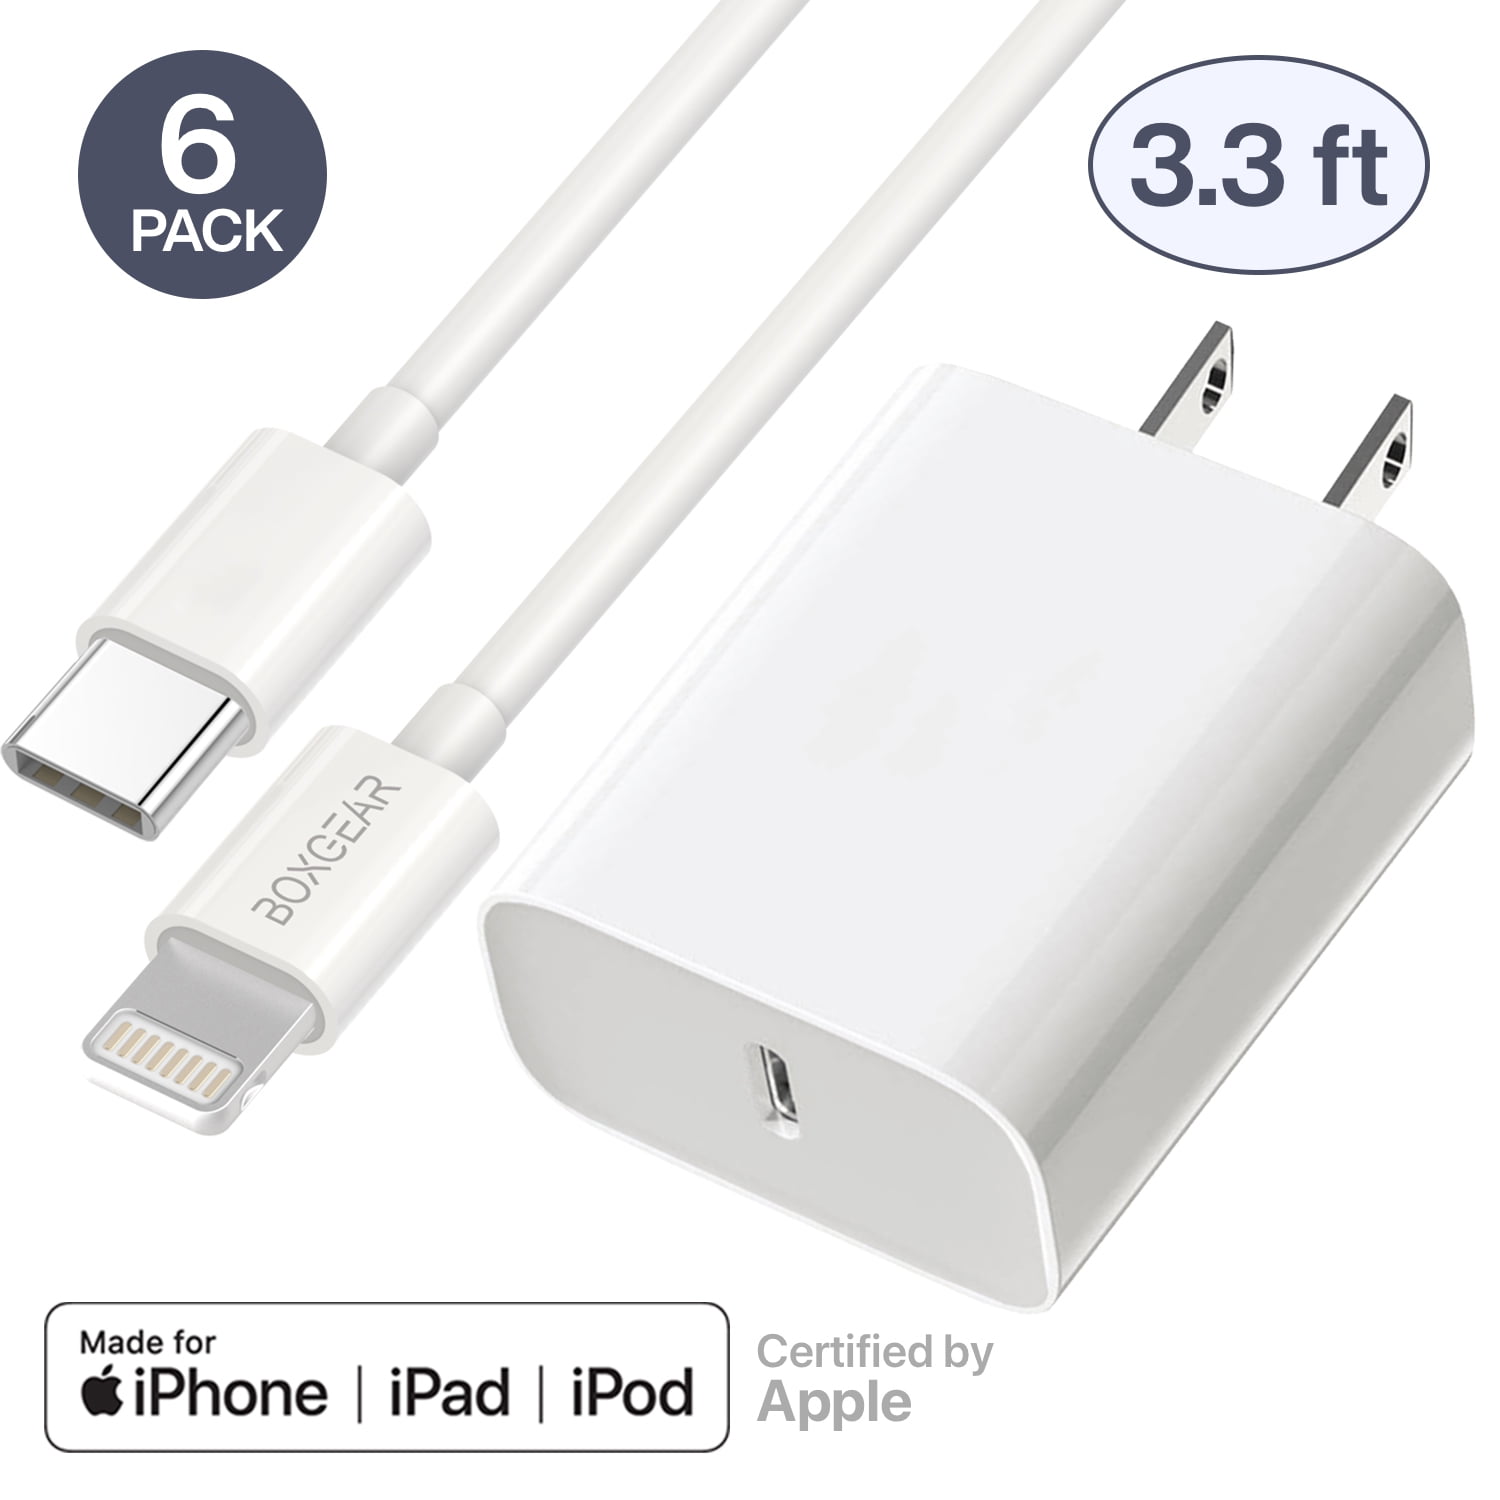 6-Pack 18W USB C Fast Charger for iPhone 11, iPhone 11 Pro, 11 Pro Max, 18W Power Delivery Adapter with Apple USB-C to Lightning Cable, Compatible with iPhone X Xs Xs